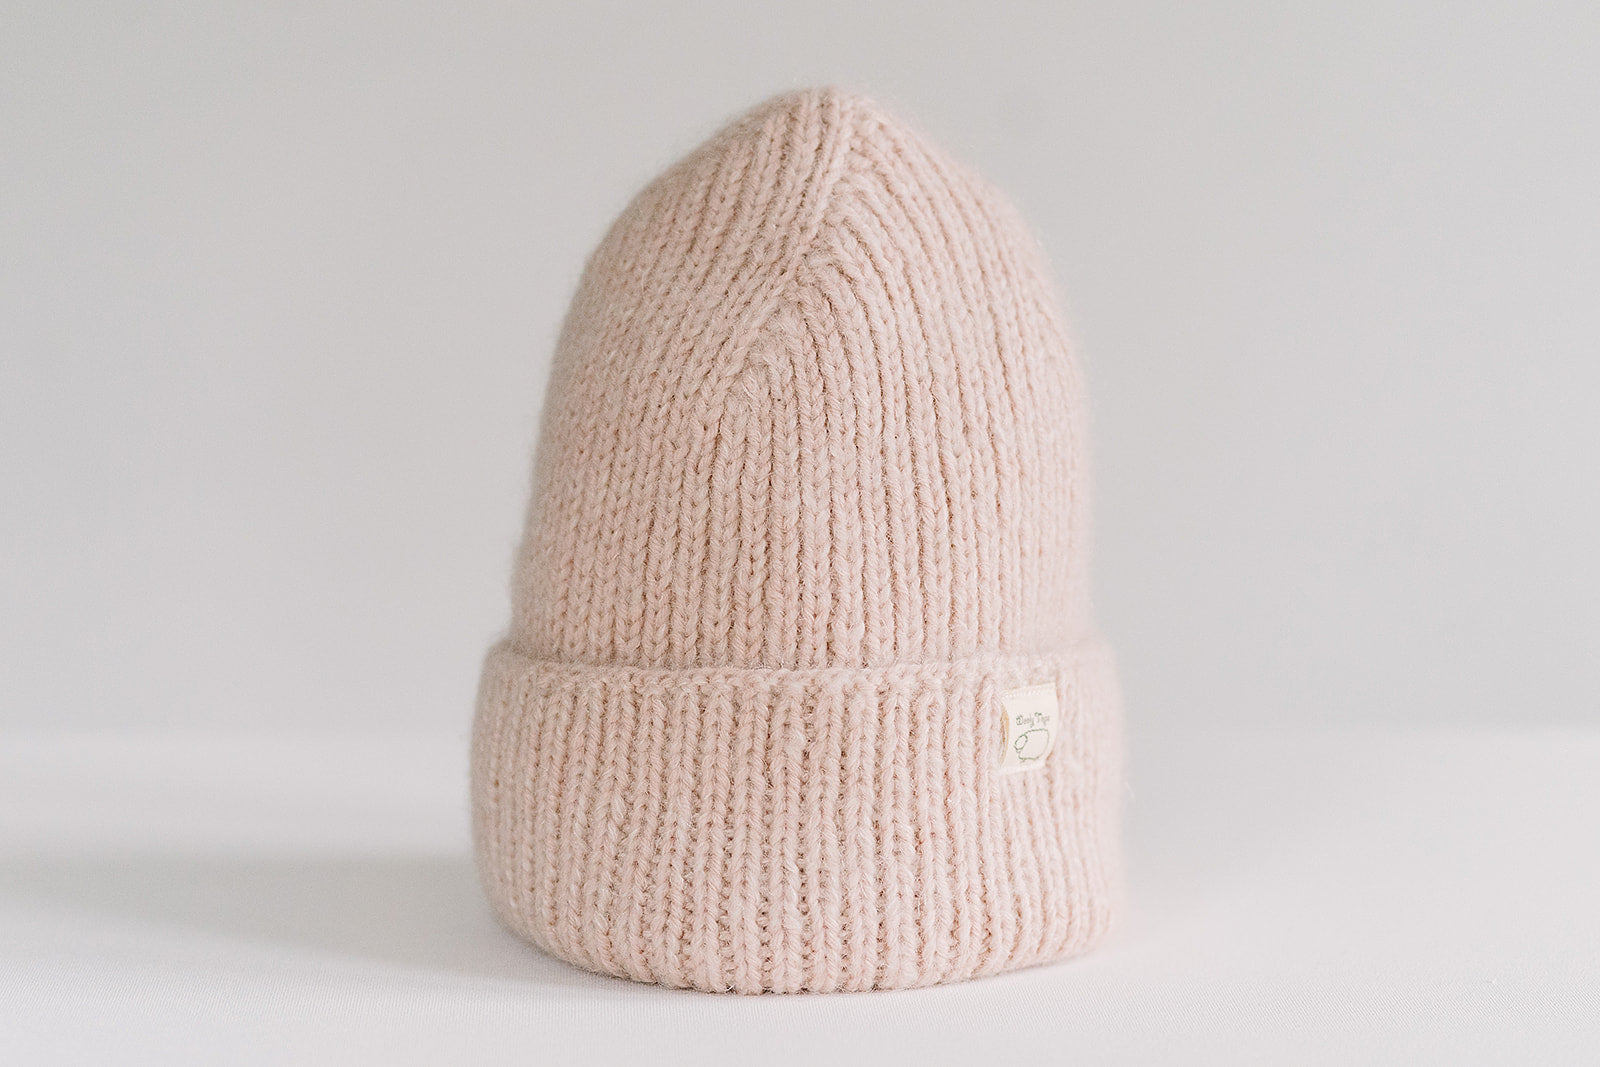 Hand-knitted Wooly Top hat in pink.